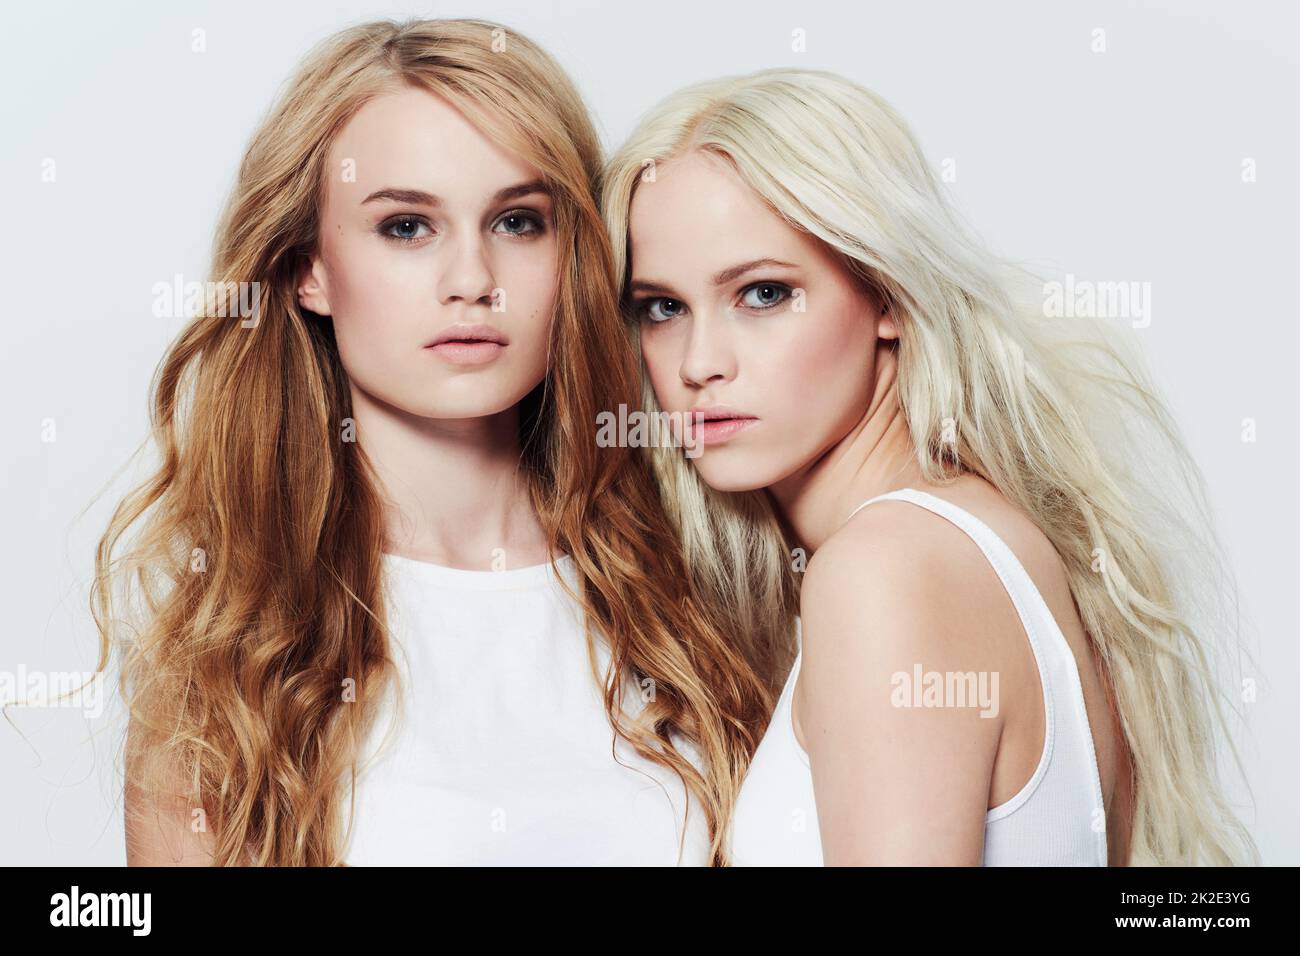 Looking casually beautiful. Studio portrait of two young models against a white background. Stock Photo